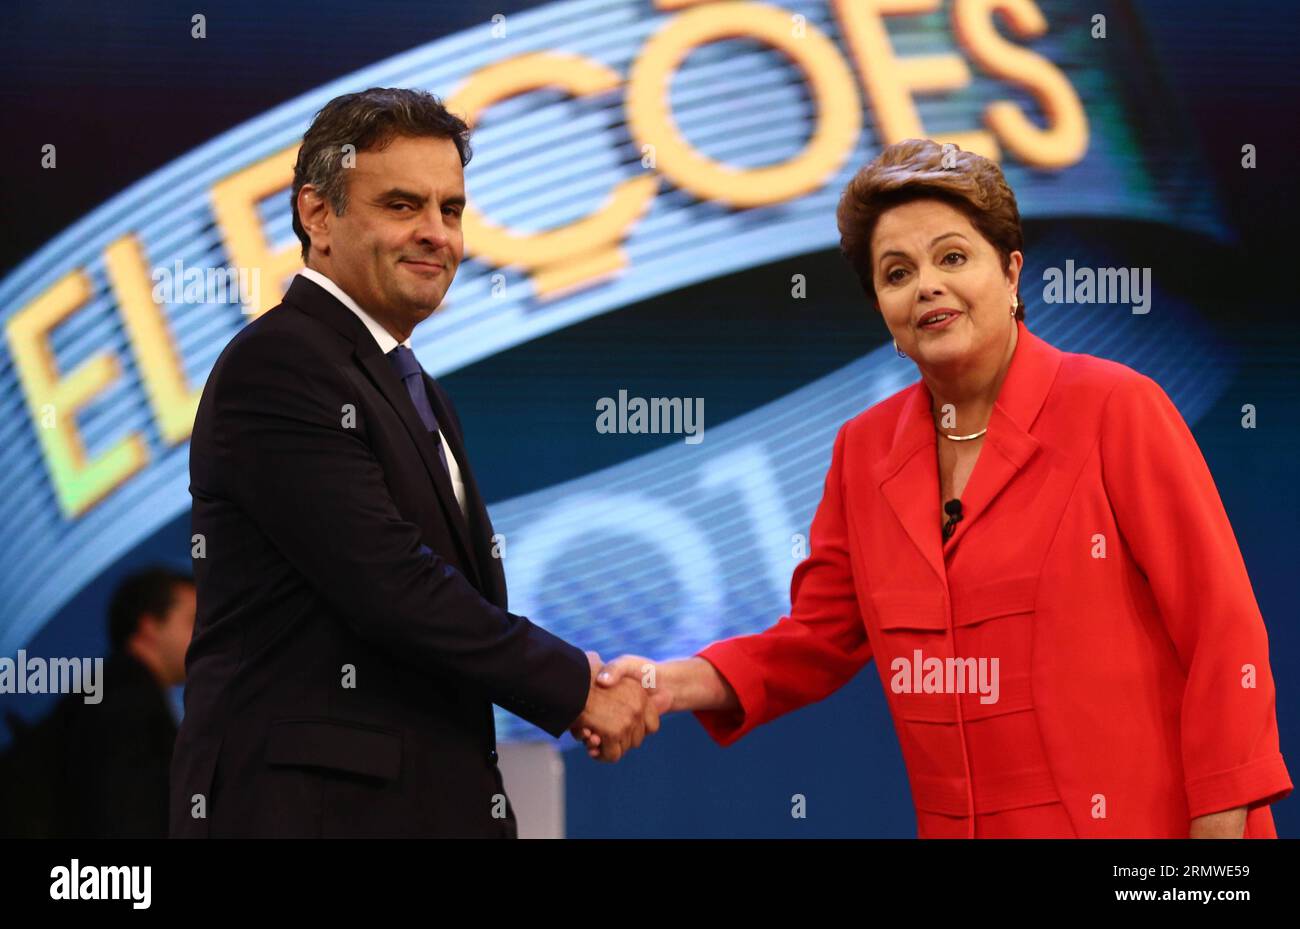 Brazil s President and presidential candidate for the Worker s Party (PT) Dilma Rousseff (R) shakes hands with candidate for Brazilian Social Democratic Party (PSDB) Aecio Neves during a television debate in Jacarepagua, west of Rio de Janeiro, Brazil, on Oct. 24, 2014. Brazil s presidential election will be defined on a second round, on Oct. 26, between Dilma Rousseff of PT and Aecio Neves of PSDB. Gustavo Serebrenick/Brazil Photo Press/Estadao Conteudo/AGENCIA ESTADO) (zhf) BRAZIL OUT BRAZIL-RIO DE JANEIRO-POLITICS-ELECTIONS AGENCIAxESTADIO PUBLICATIONxNOTxINxCHN   Brazil S President and Pre Stock Photo